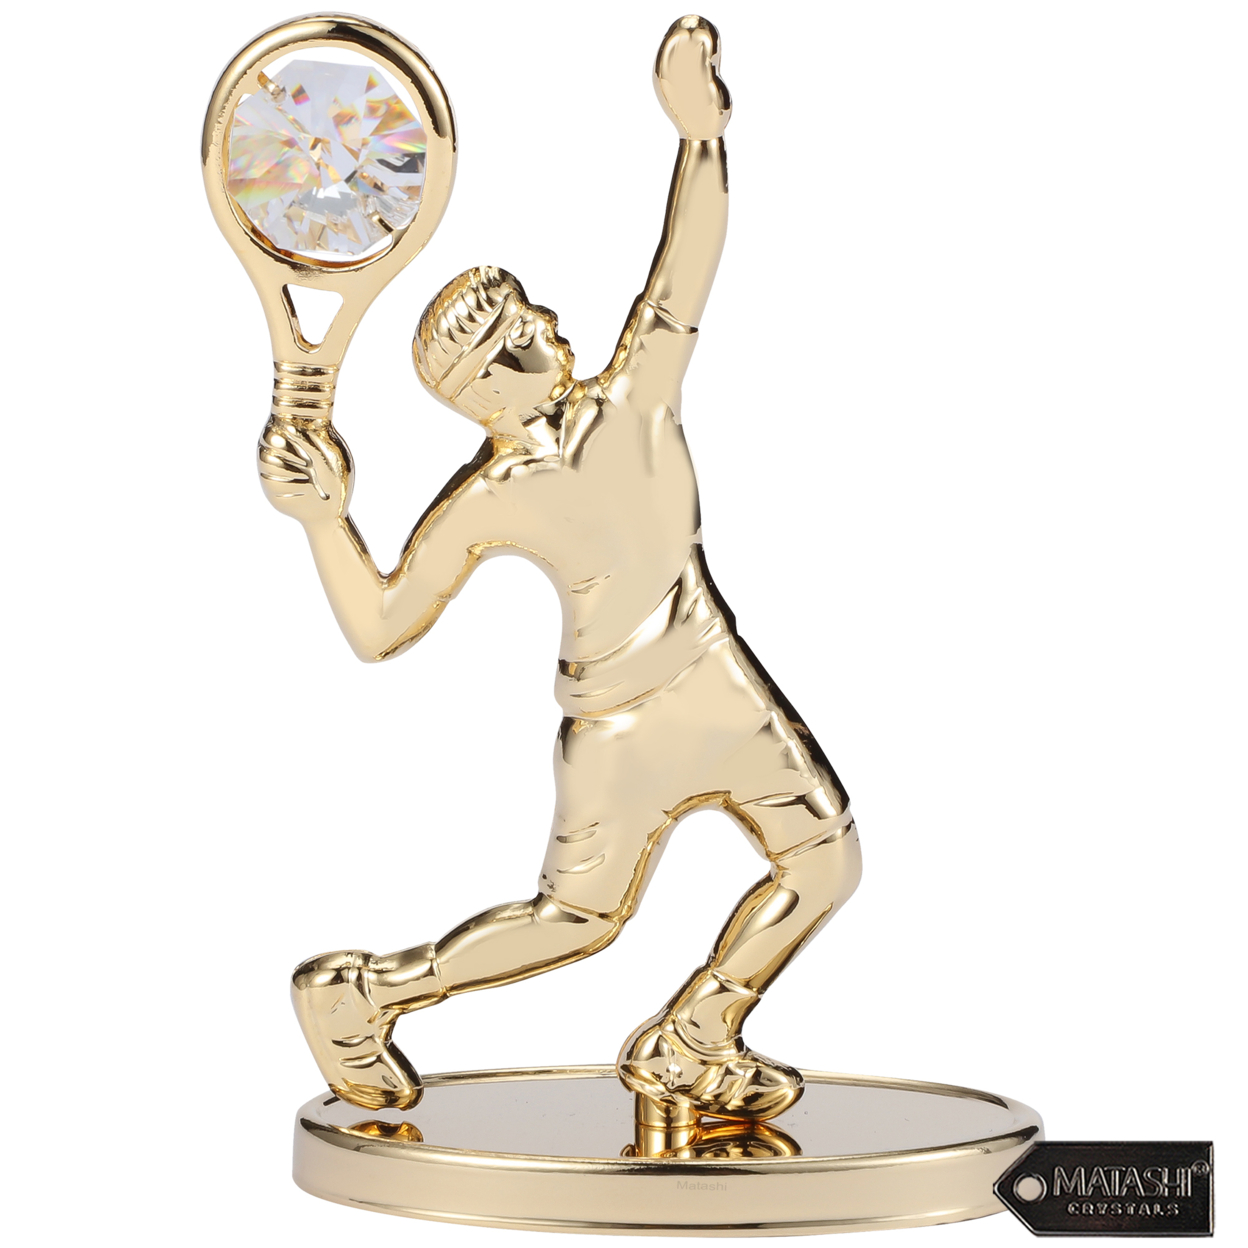 Matashi 24K Gold/Silver Plated Tennis Player Figurine With Crystals, Gift For Sports Fan Birthday Desk Accessories Trophy Boss Gift - Gold